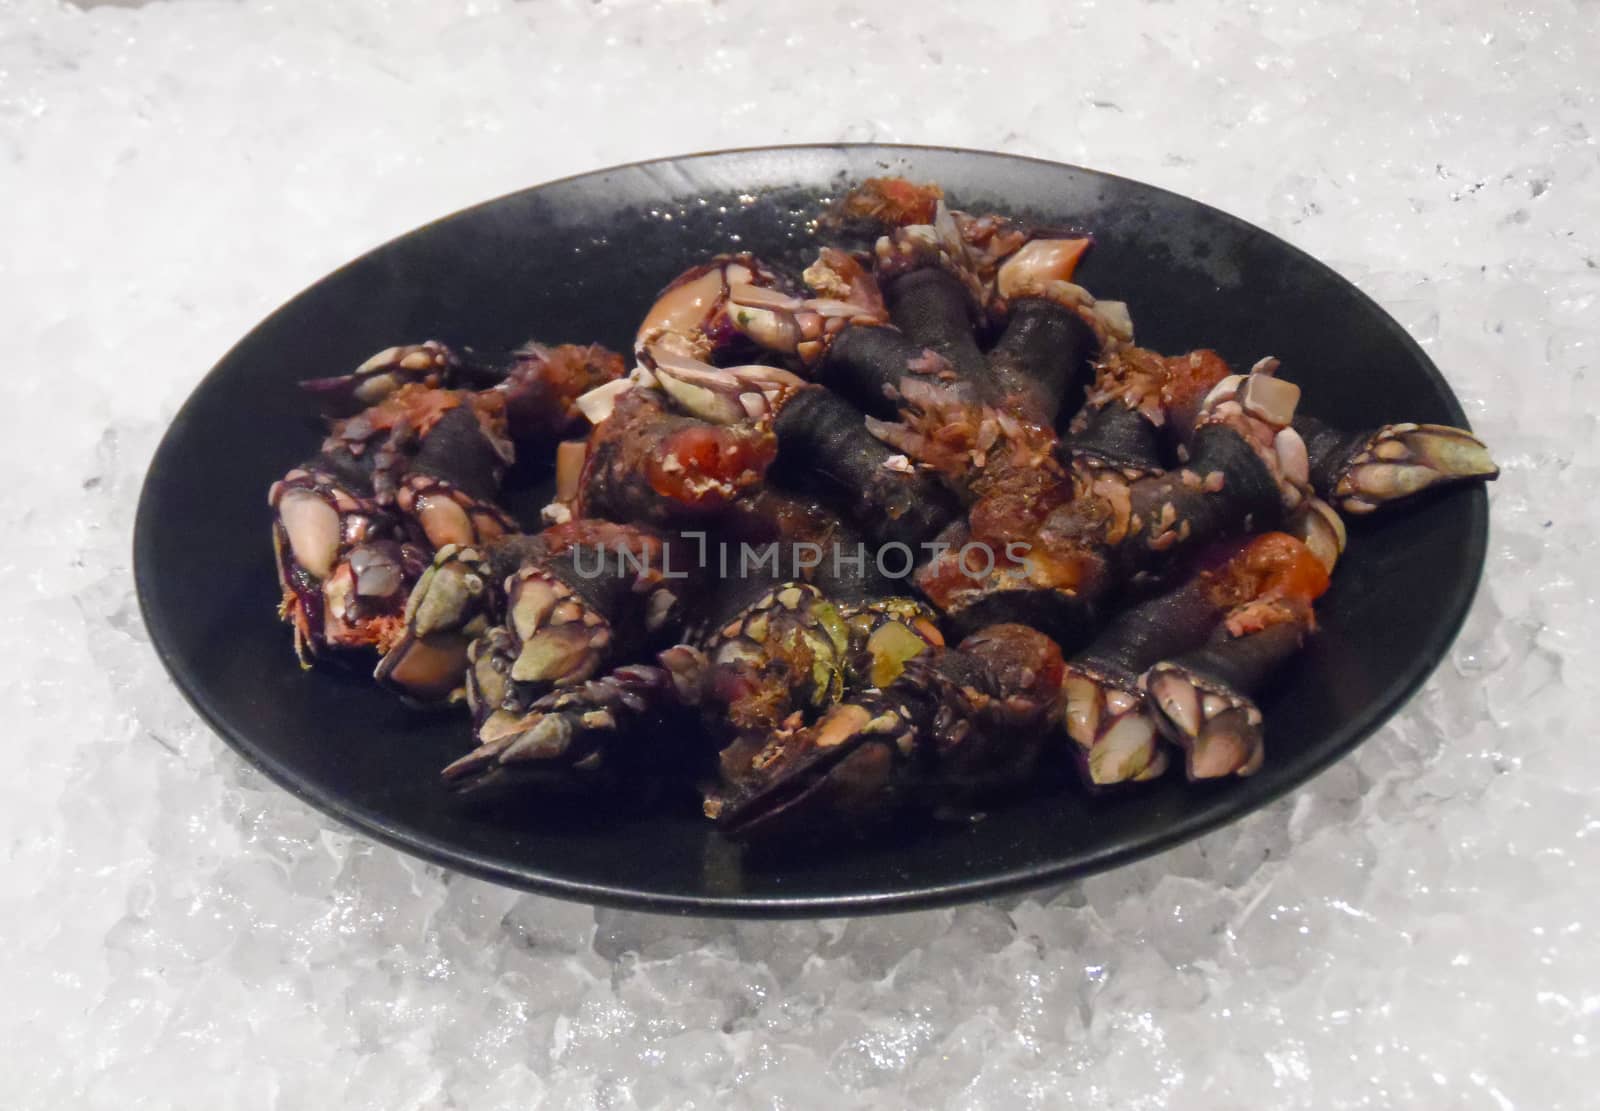 Plate of barnacles on ice.